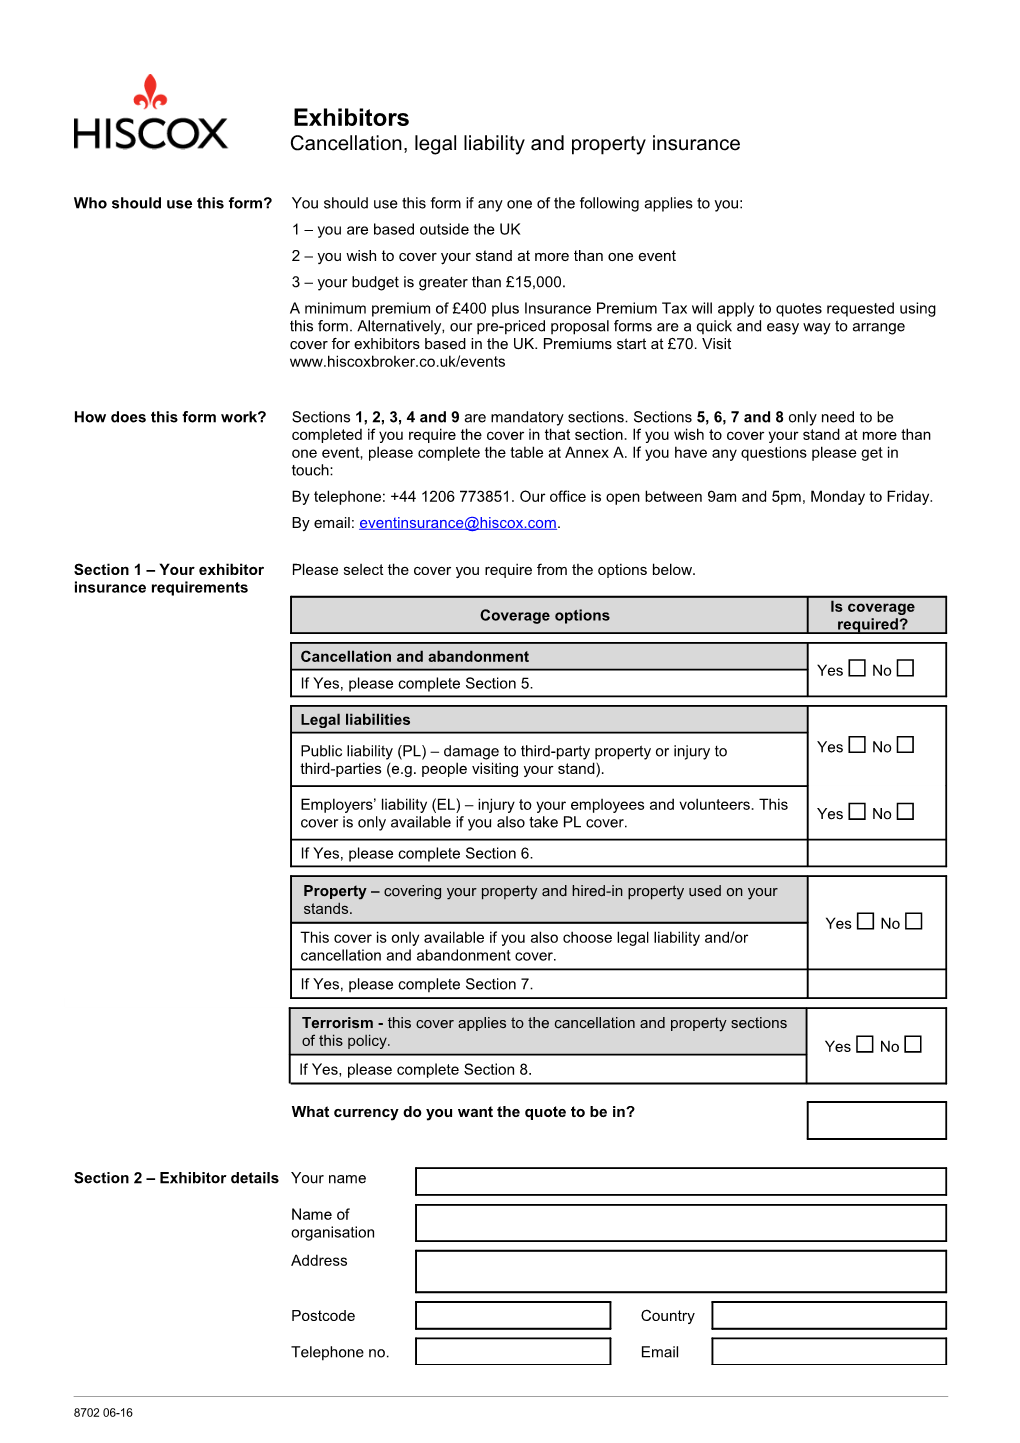 Exhibitors (Events) - Full Bespoke Quote Proposal Form (UK)